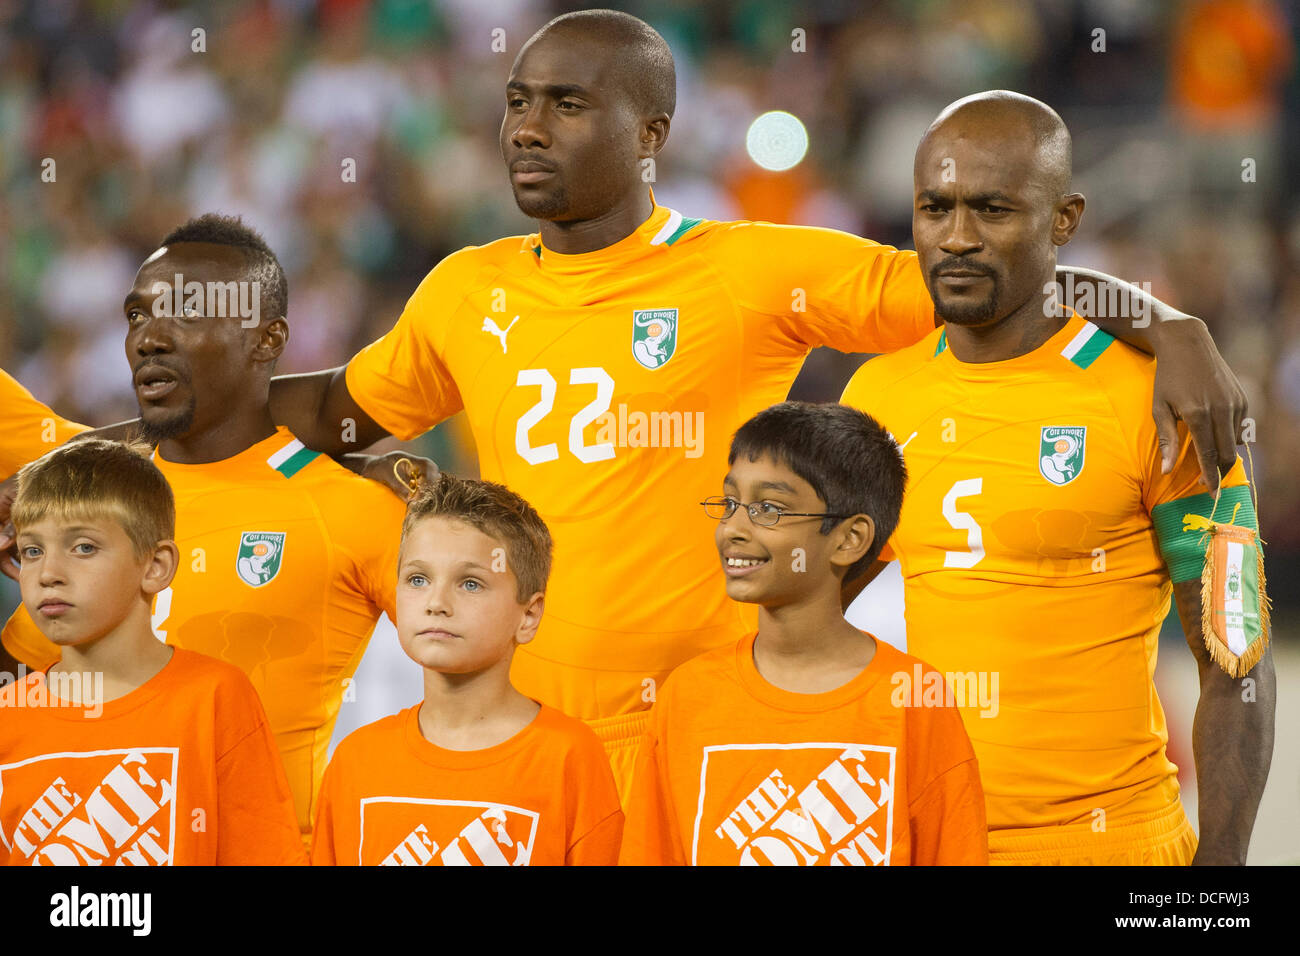 Aug. 14, 2013 - East Rutherford, New Jersey, U.S - August 14, 2013: Ivory Coast National Team Souleman Bamba defender (22) and Ivory Coast National Team defender Didier Zokora (5) stand for the National Anthem during the International friendly match between Mexico and Ivory Coast at Met Life Stadium, East Rutherford, NJ. Mexico defeated Ivory Coast 4-1. Stock Photo